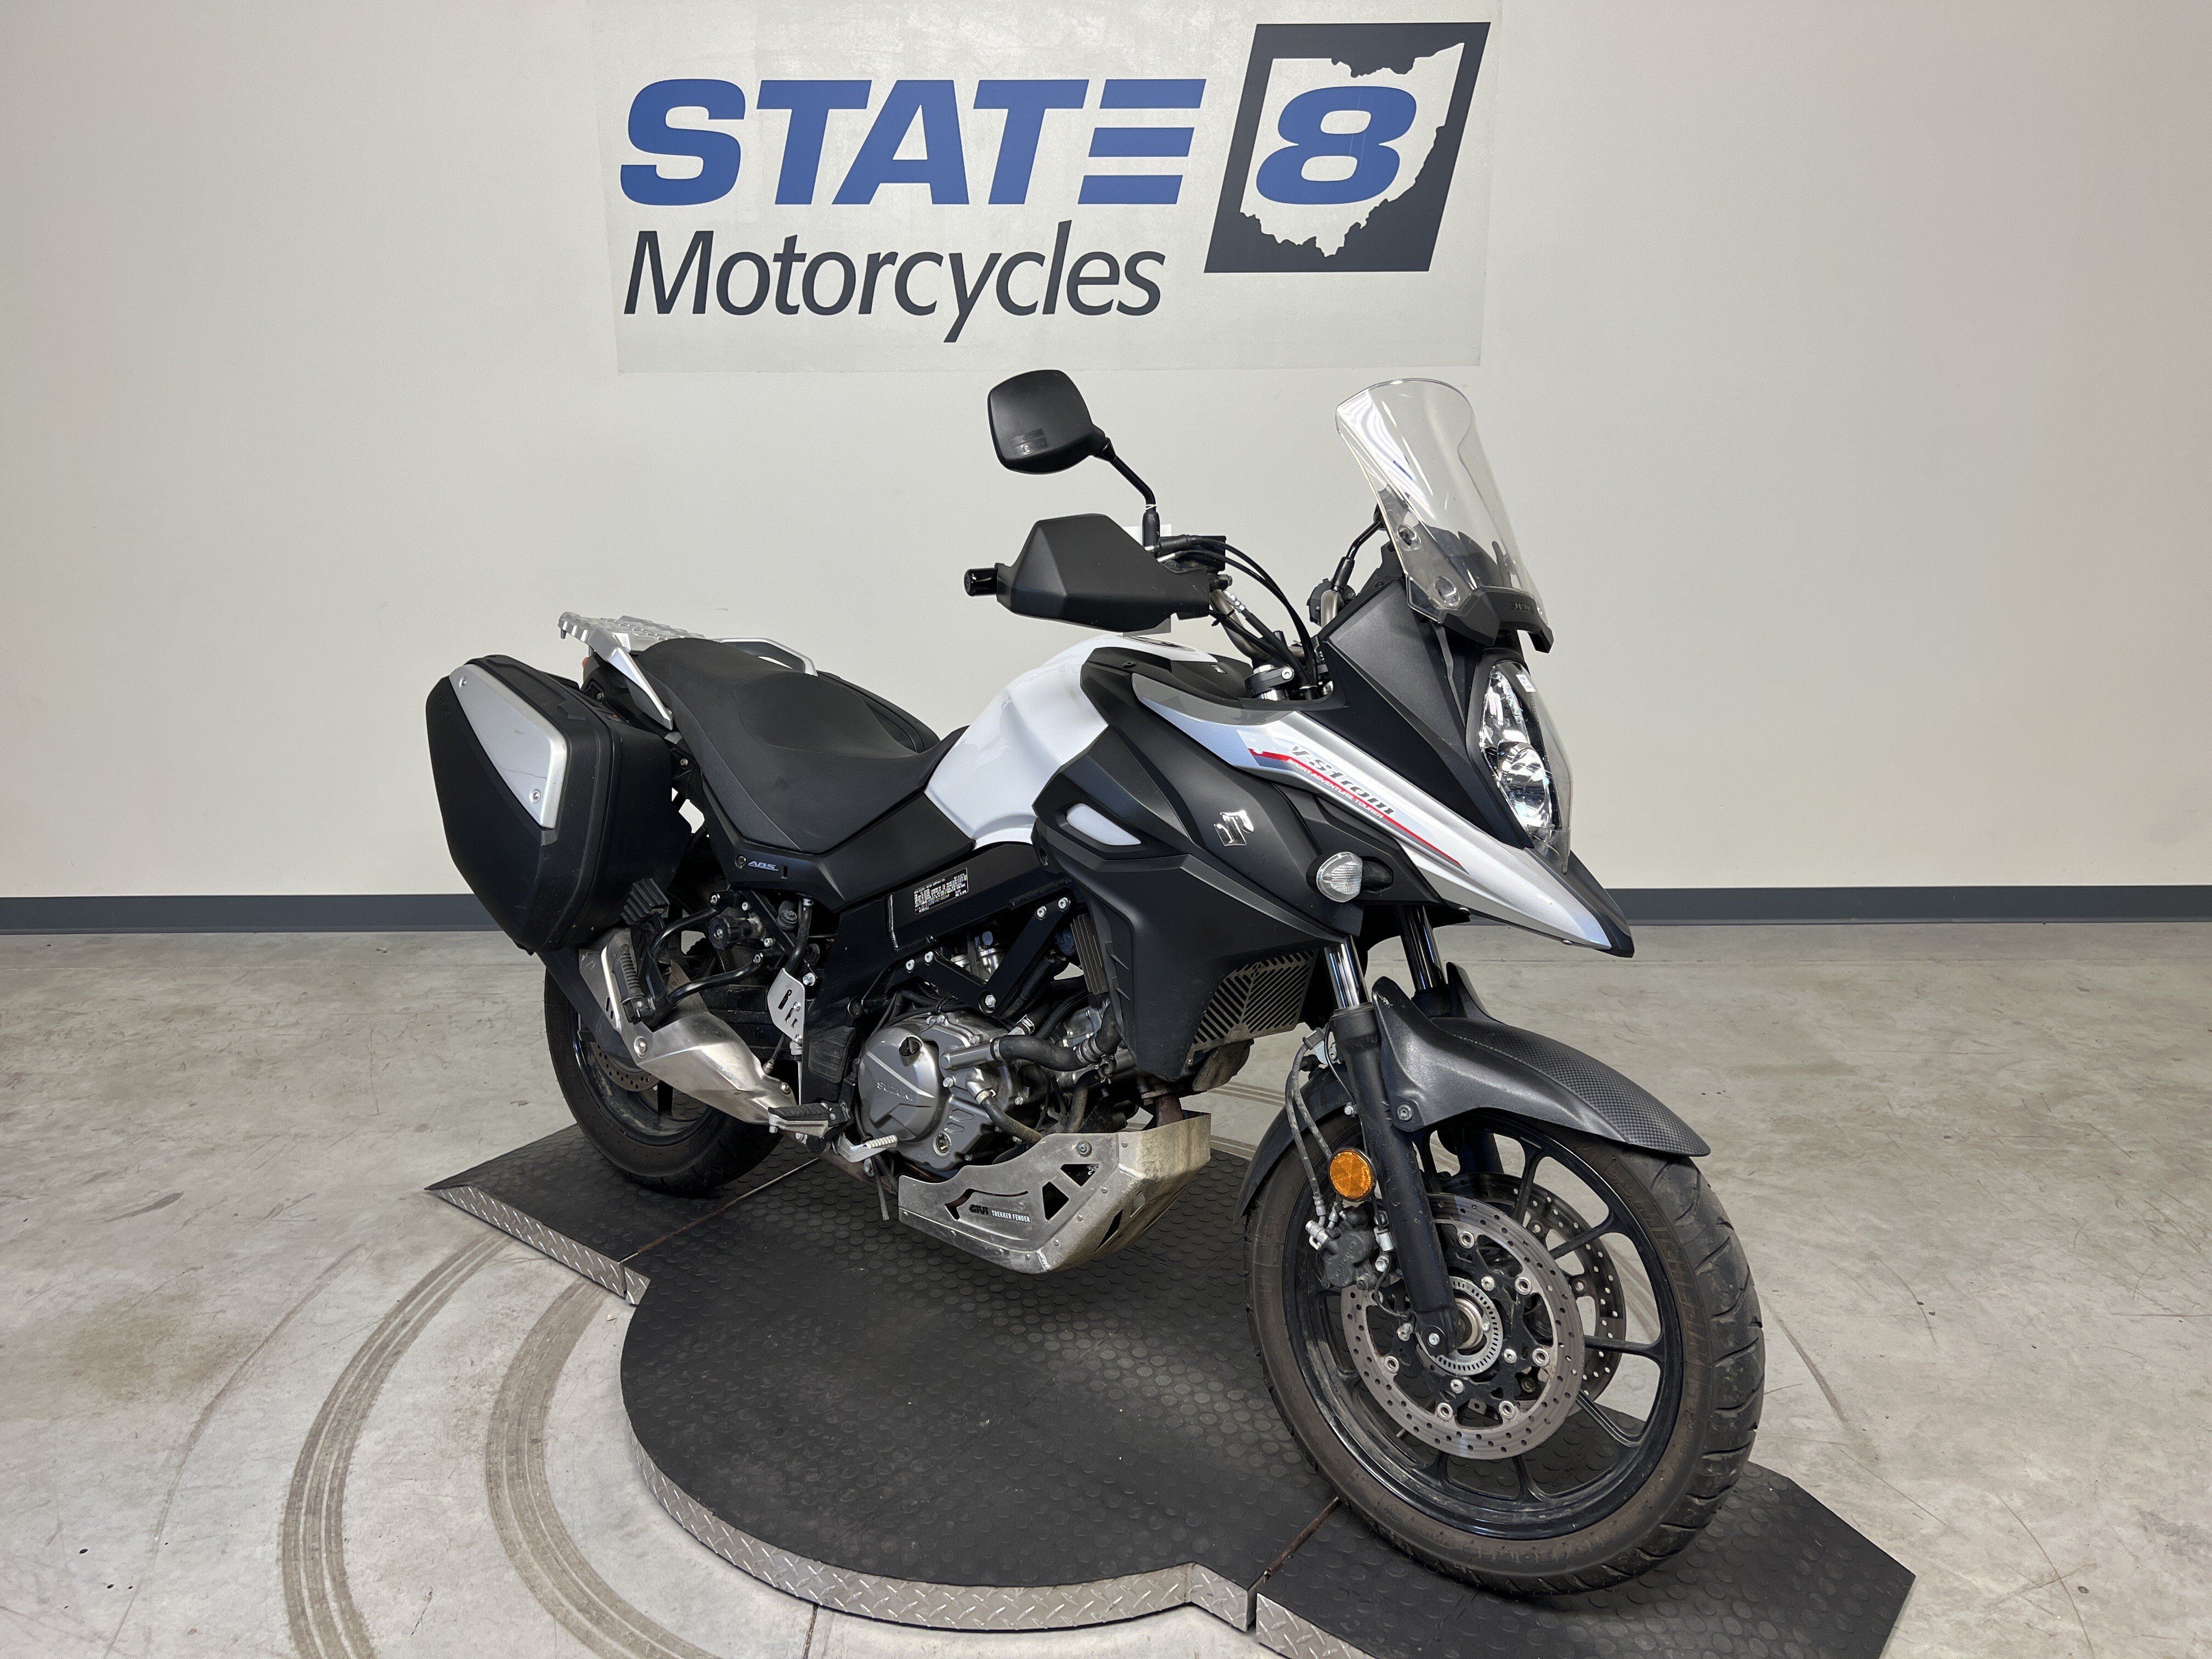 2021 Suzuki V-Strom 650 specifications and pictures